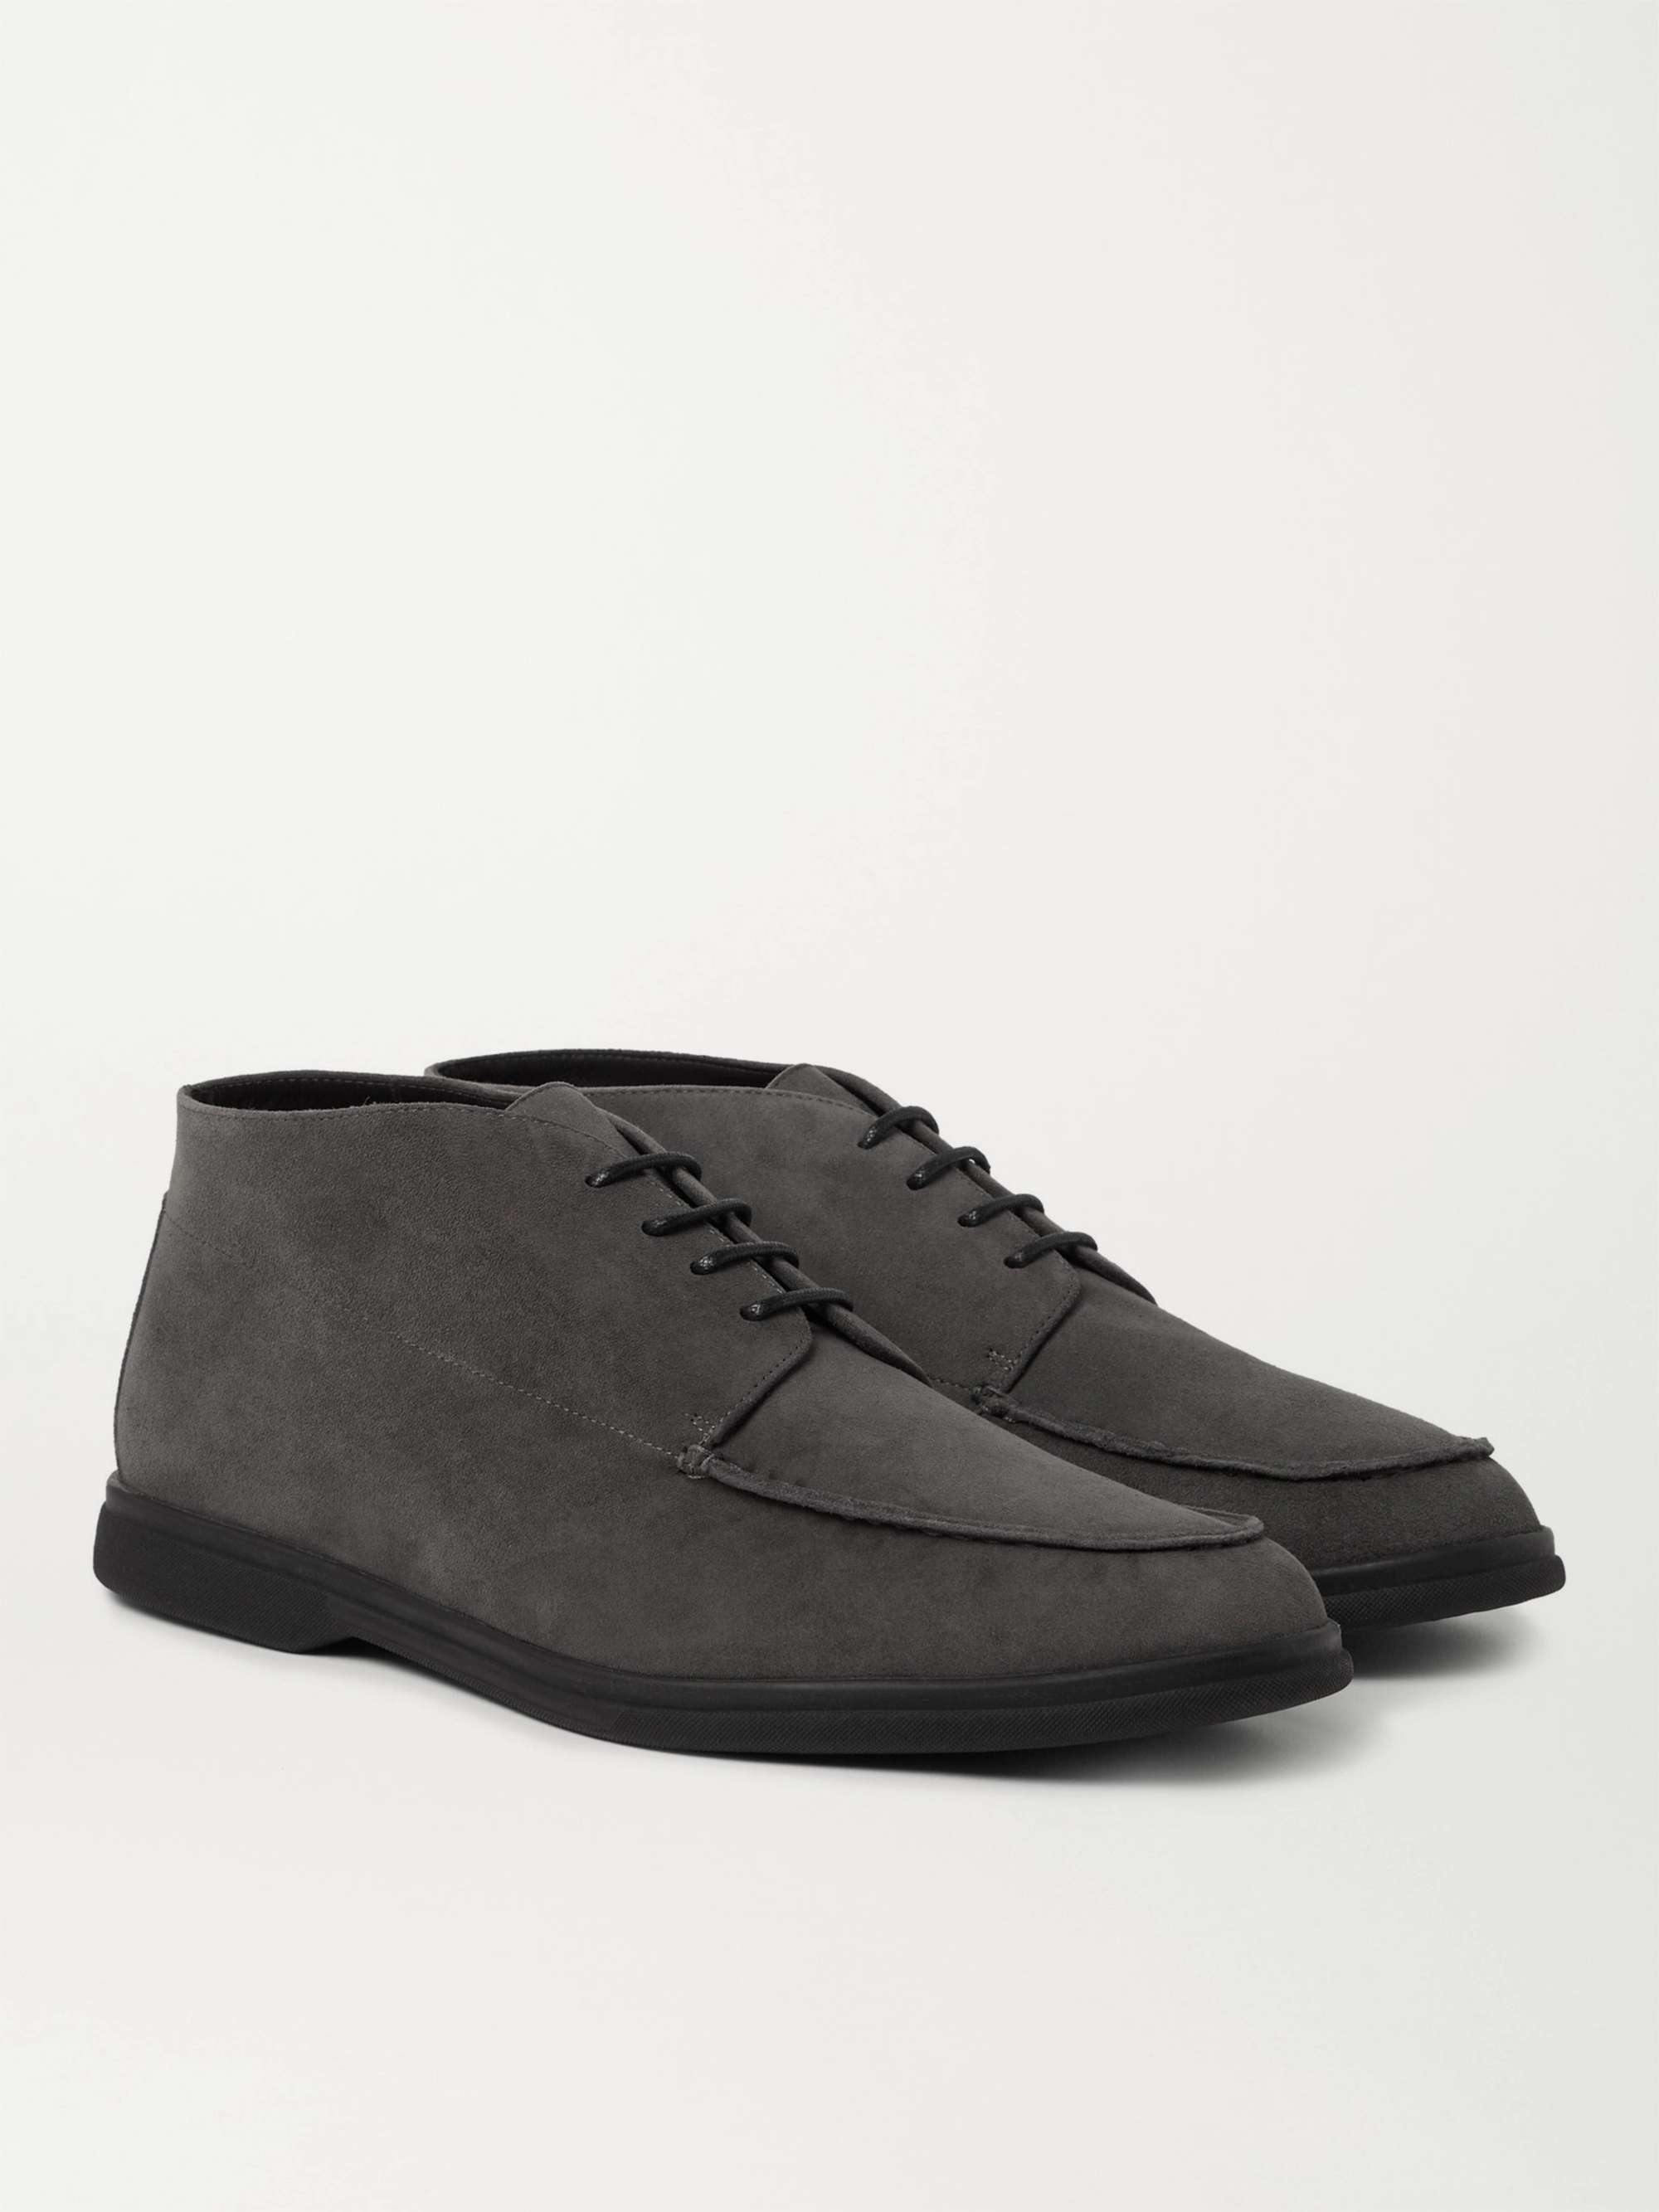 CANALI Suede Desert Boots